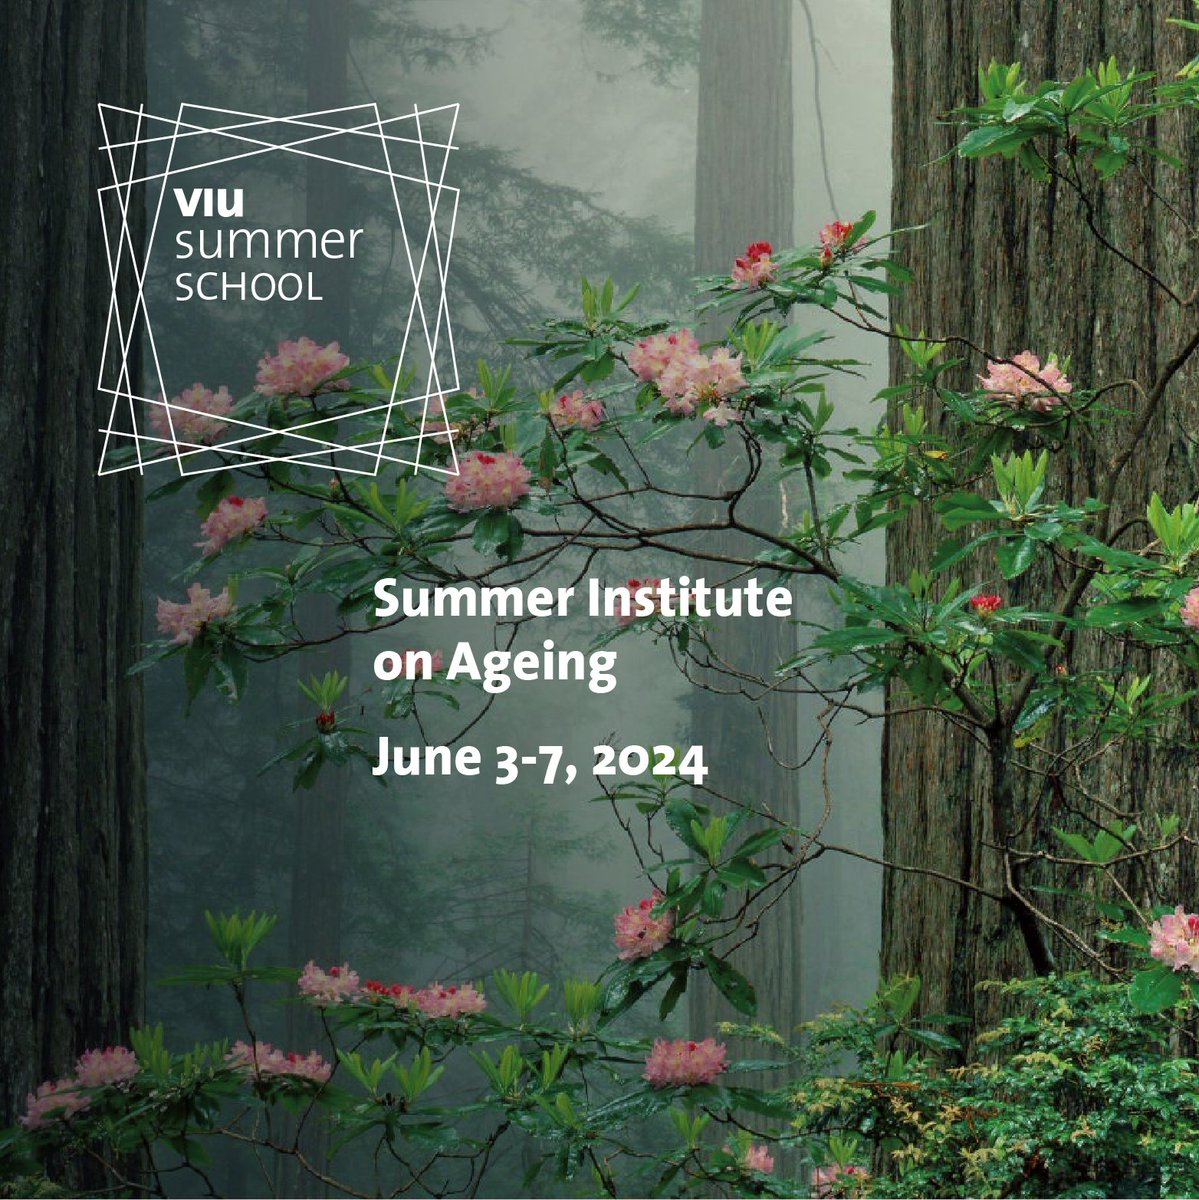 Learn how to work with #SHAREdata and dive deeper into 'The Value of Longitudinal Data to Study Ageing' at @univiu's Summer Institute on Ageing in Venice 🇮🇹 Applications are open until April 19 📊 univiu.org/study/summer-s…